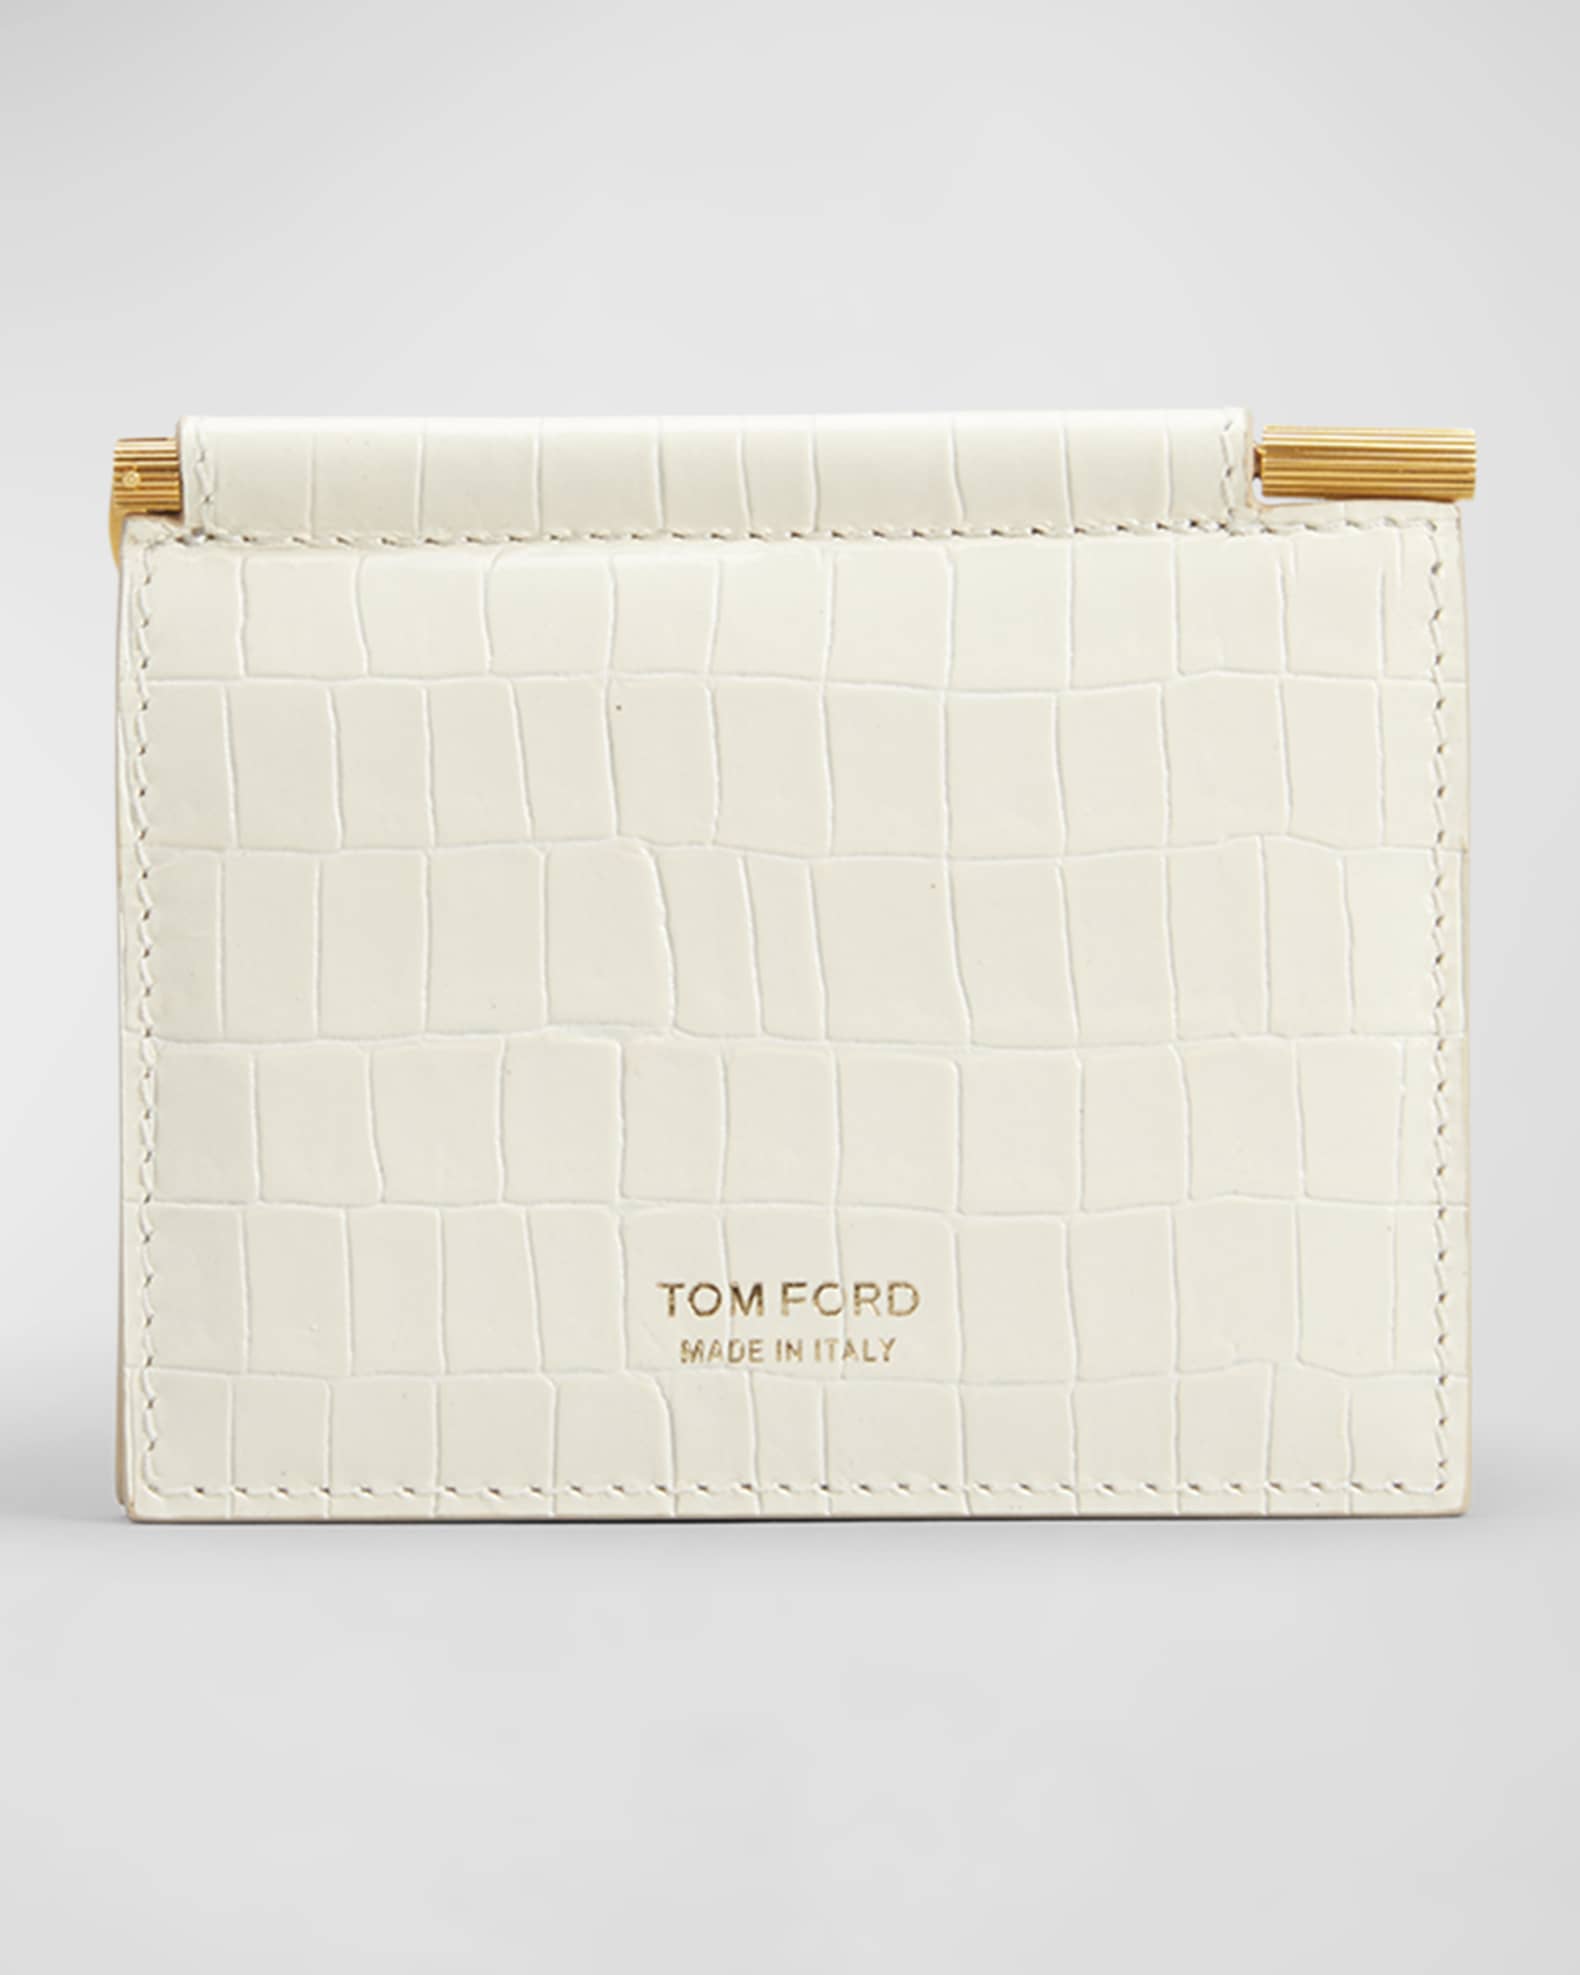 TOM FORD Men's Croc-Printed Leather Money Clip Card Holder | Neiman Marcus